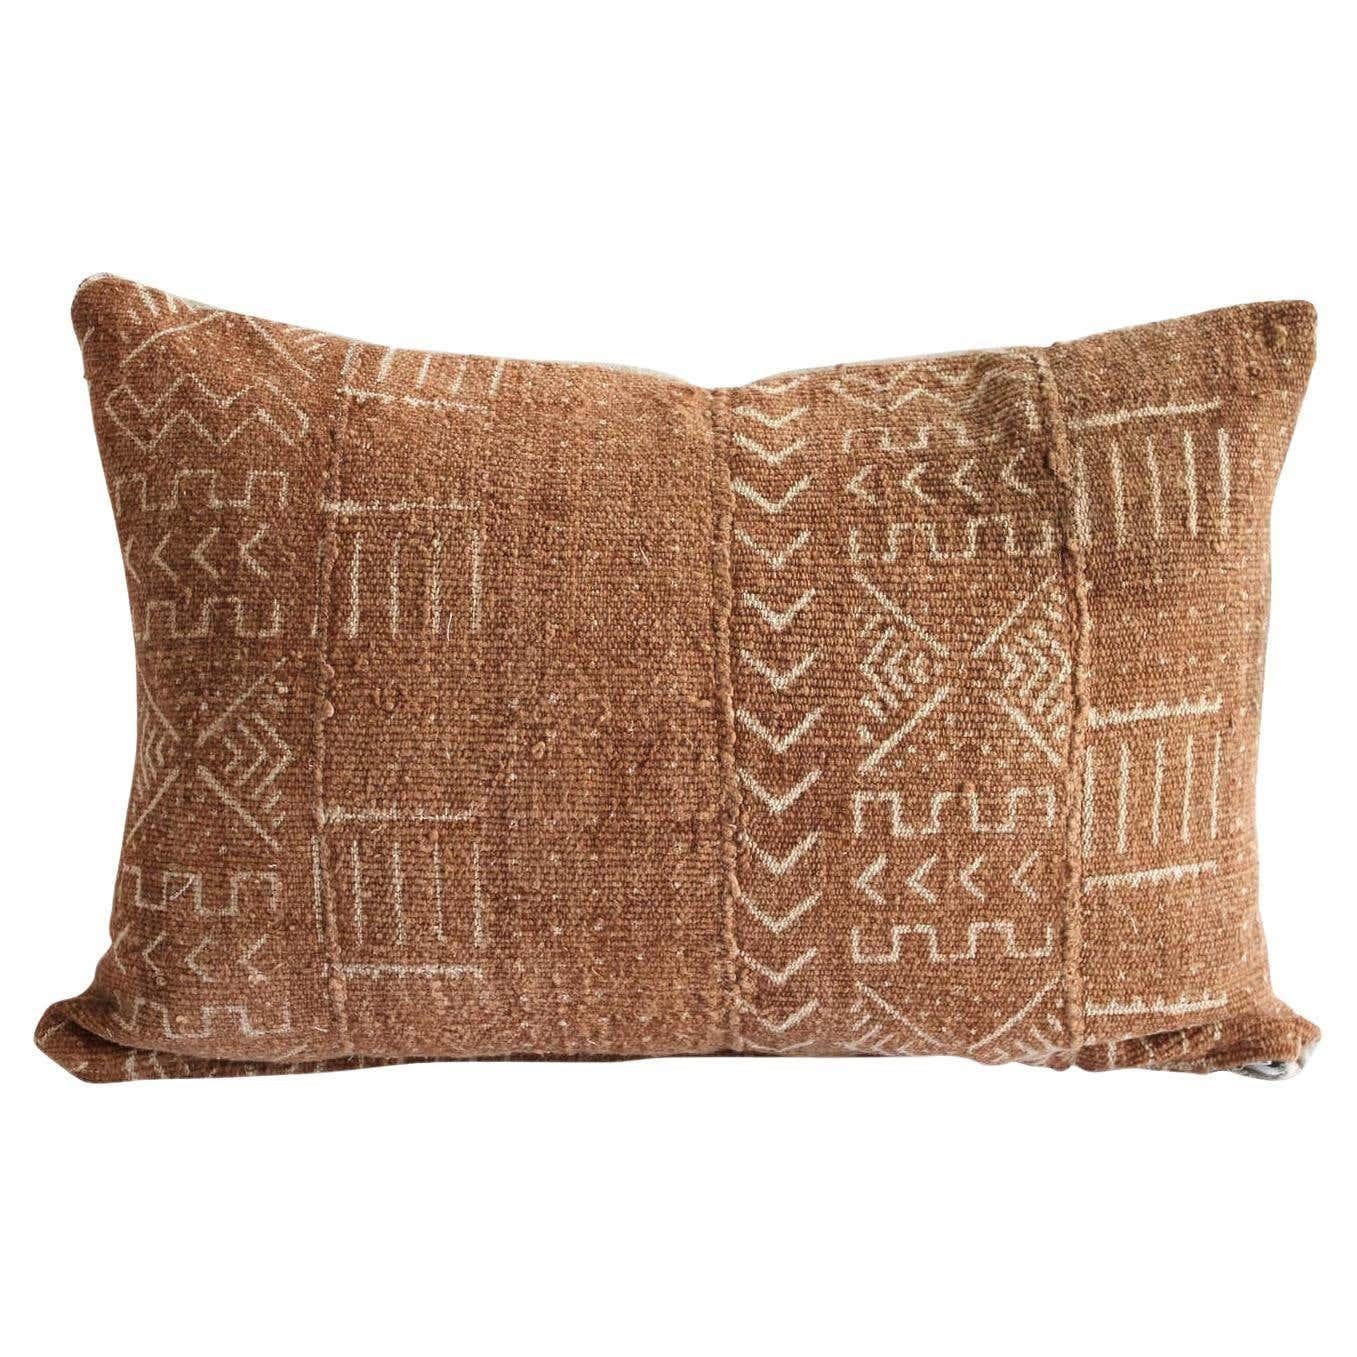 Vintage African Mudcloth pillow. A deep burnt orange rust color, with off-white arrow and mixed patterns. Sewn with a zipper closure, and natural linen backing. The inside has an overlocked edge, can be machine washed on gentle. For color fading dry